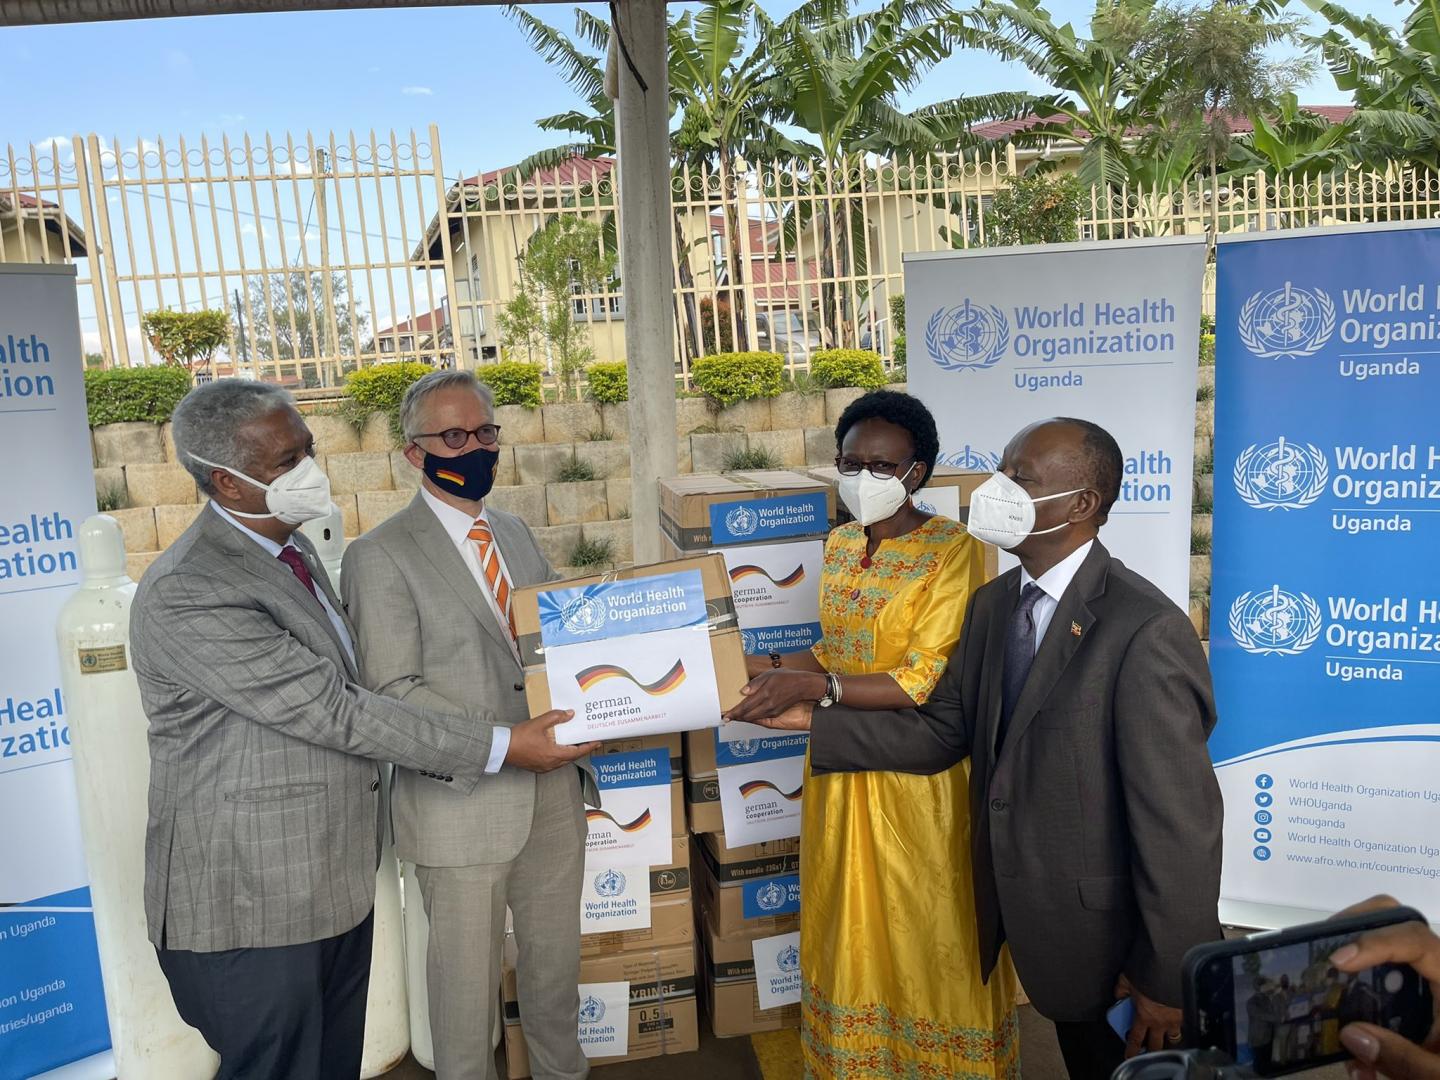 Handover of Syringes to the Ministry of Health in Uganda